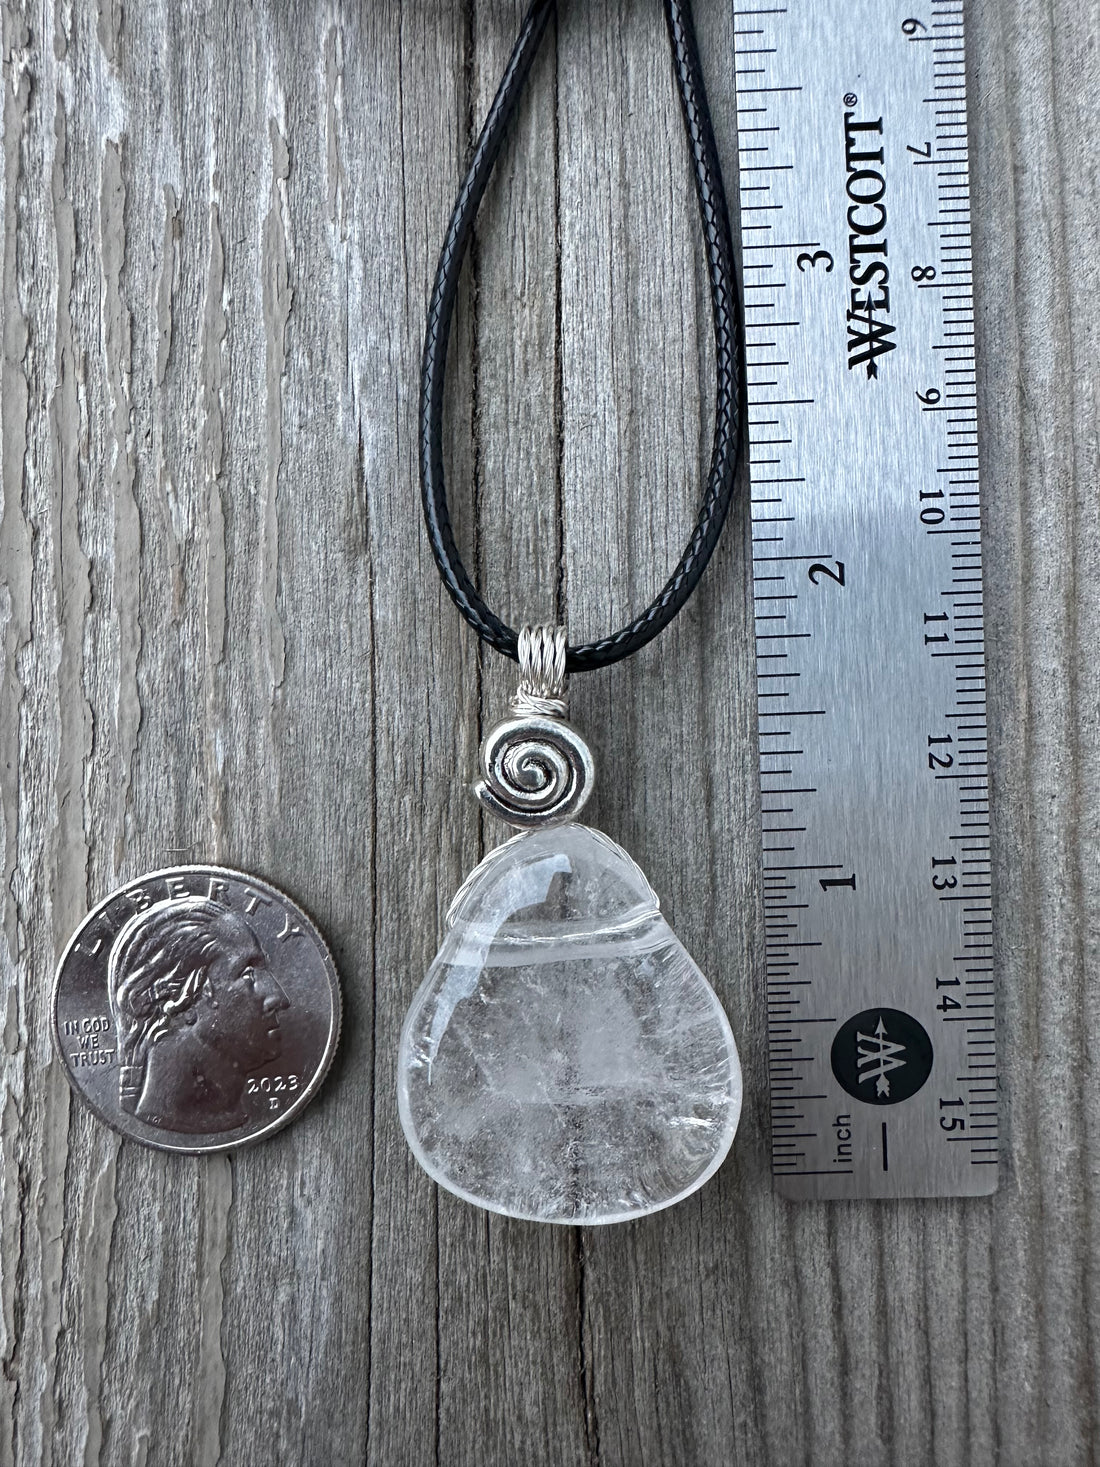 Rock Crystal for Wisdom, Loyalty and Protection. Swirl to Signify Consciousness.